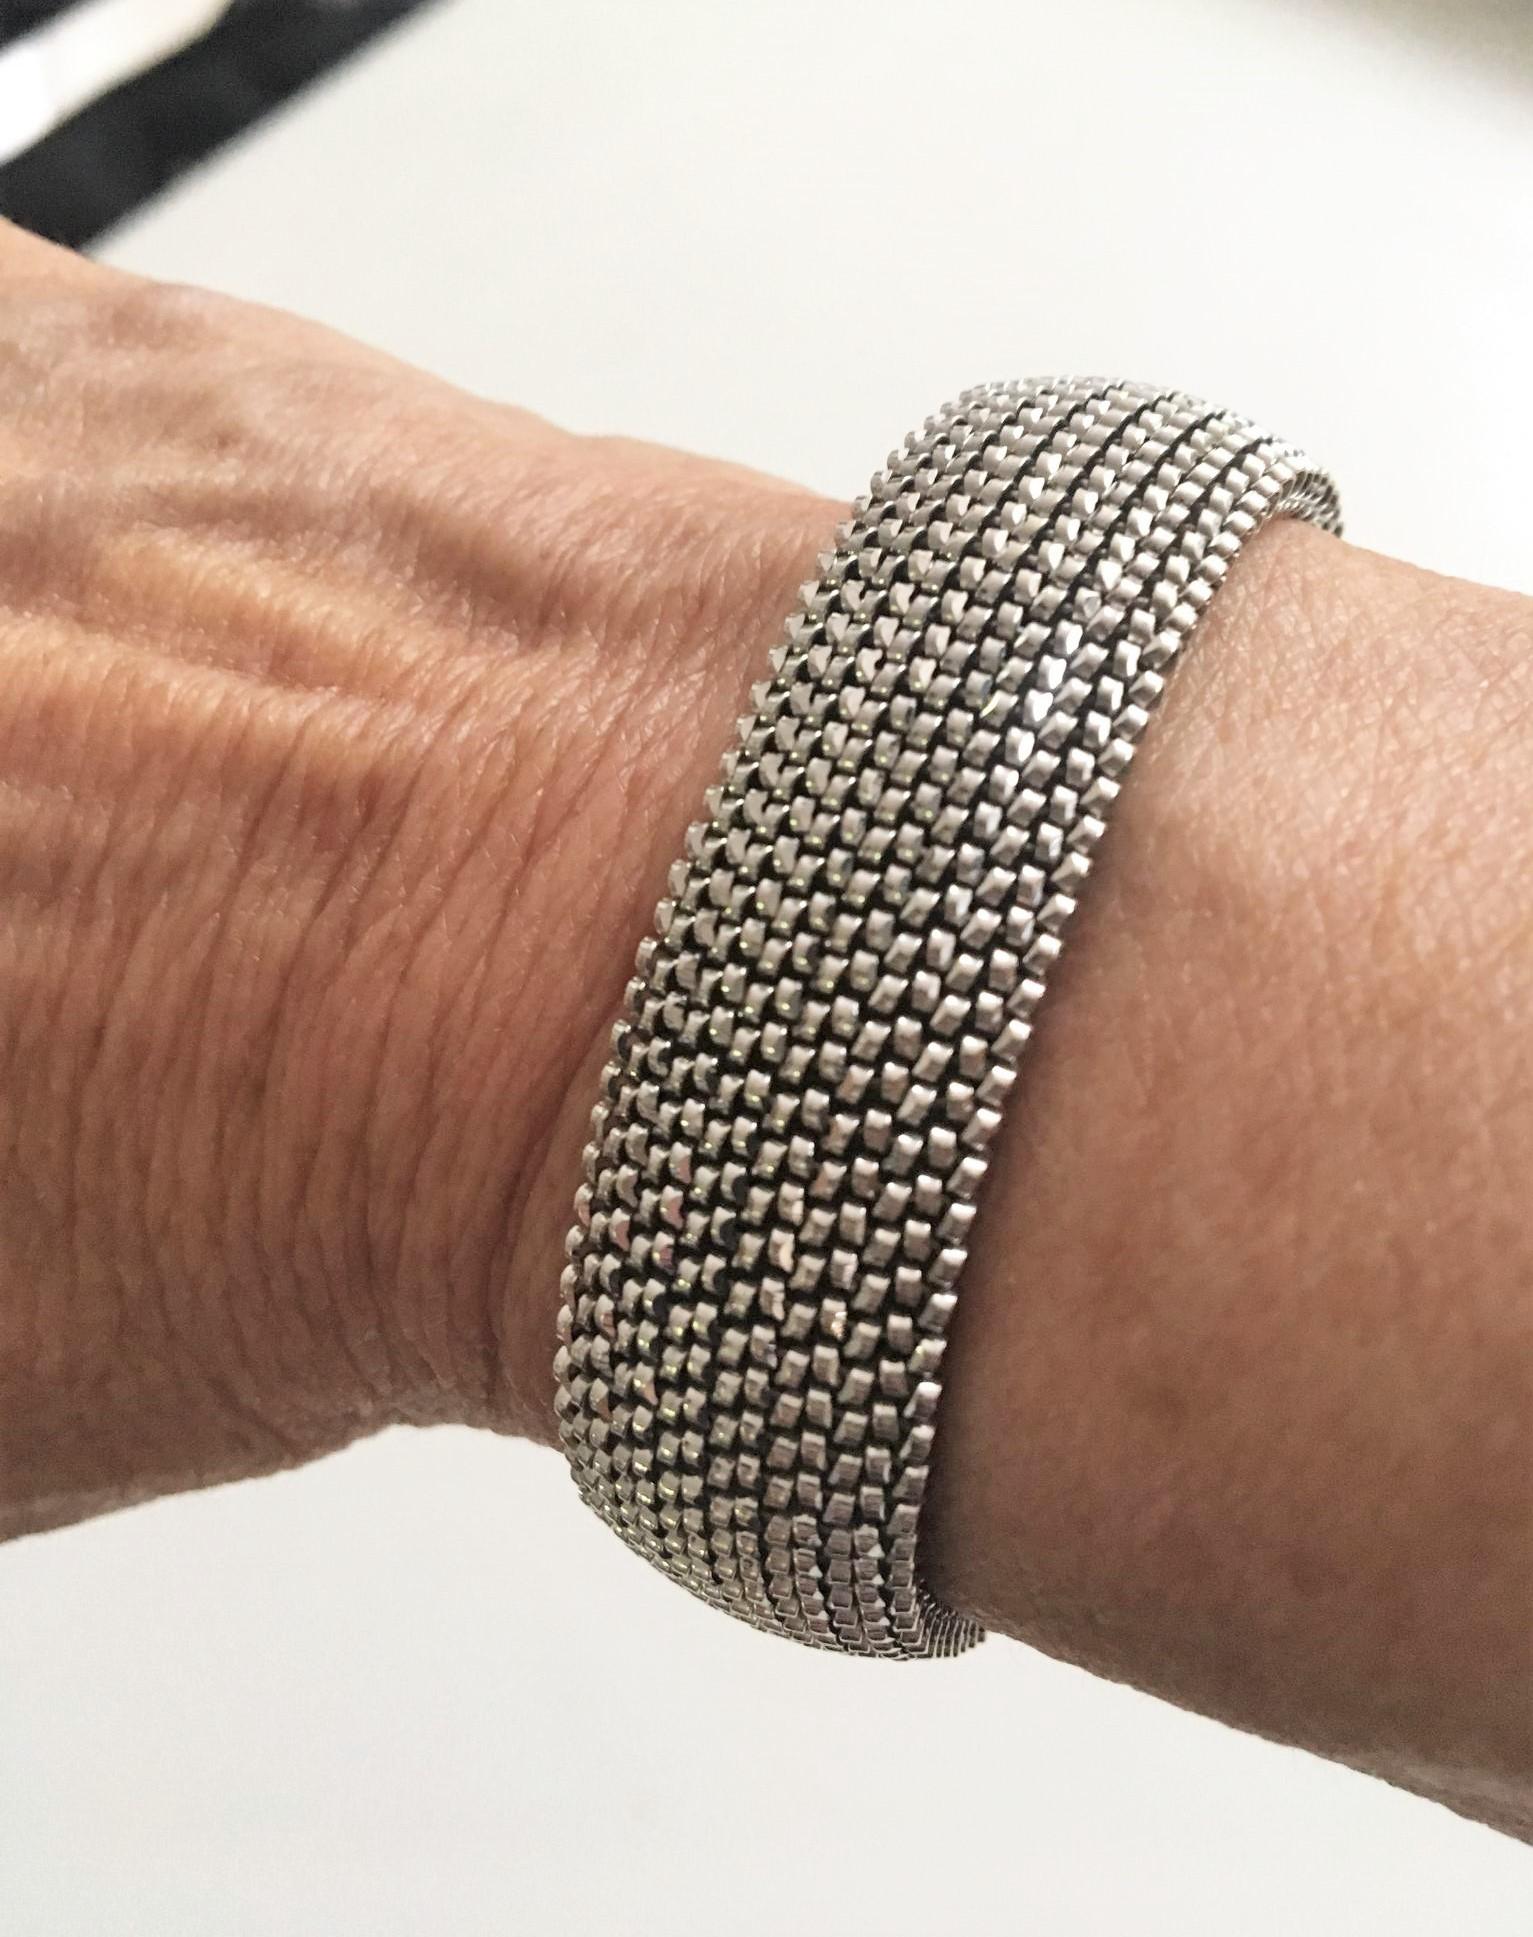 Sleek styling,  with flexible stretch and incredibly comfortable to wear.  This modern style bracelet is made of eighteen karat (18K) white gold flexible mesh.
Unmatched in its versatility, this bracelet has an adjustable fit and measures at and it